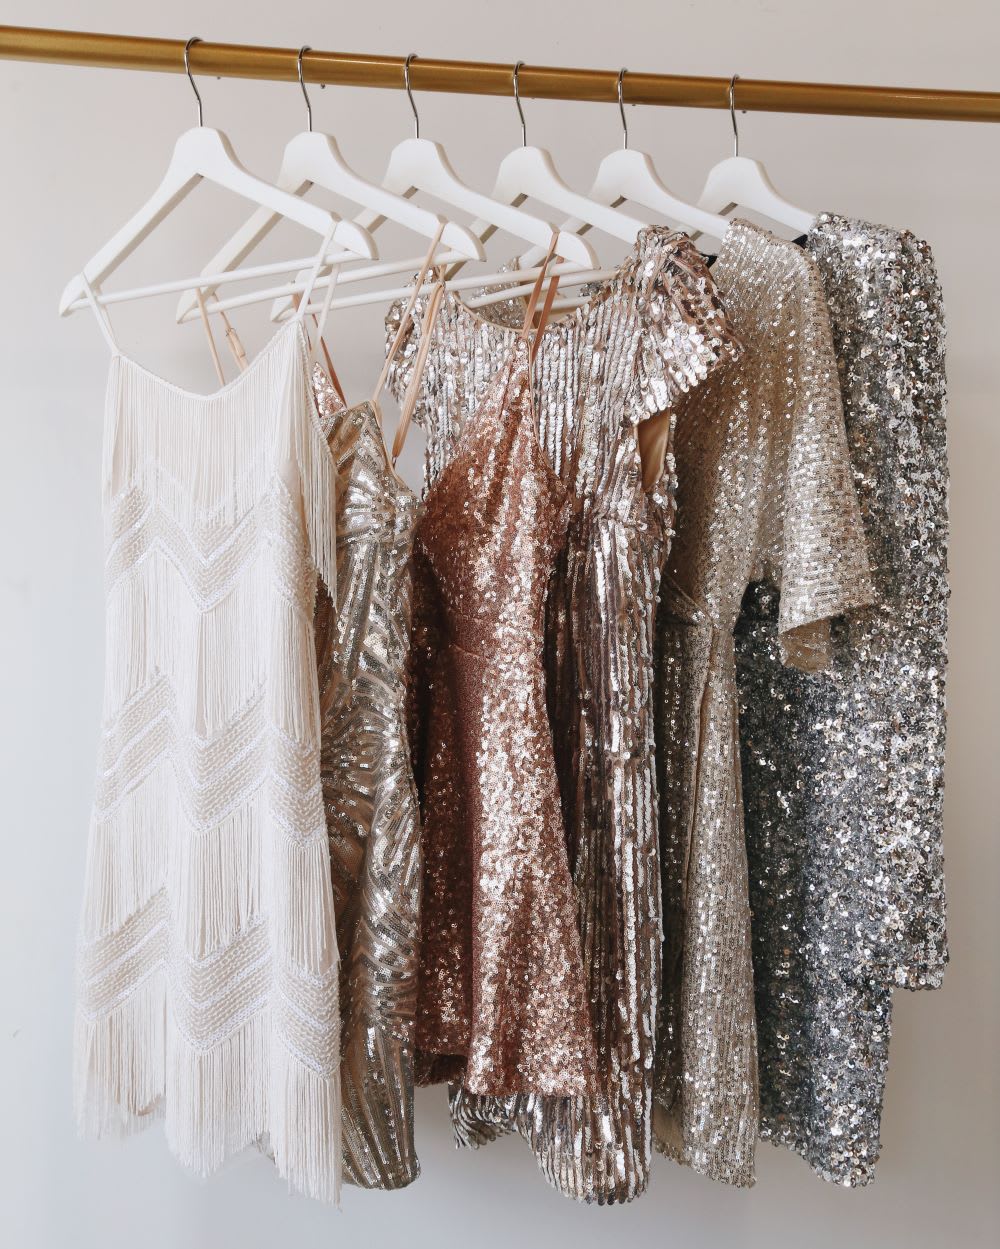 What To Wear For New Year's Eve: Outfit Ideas For 2022 - Lulus.com Fashion  Blog